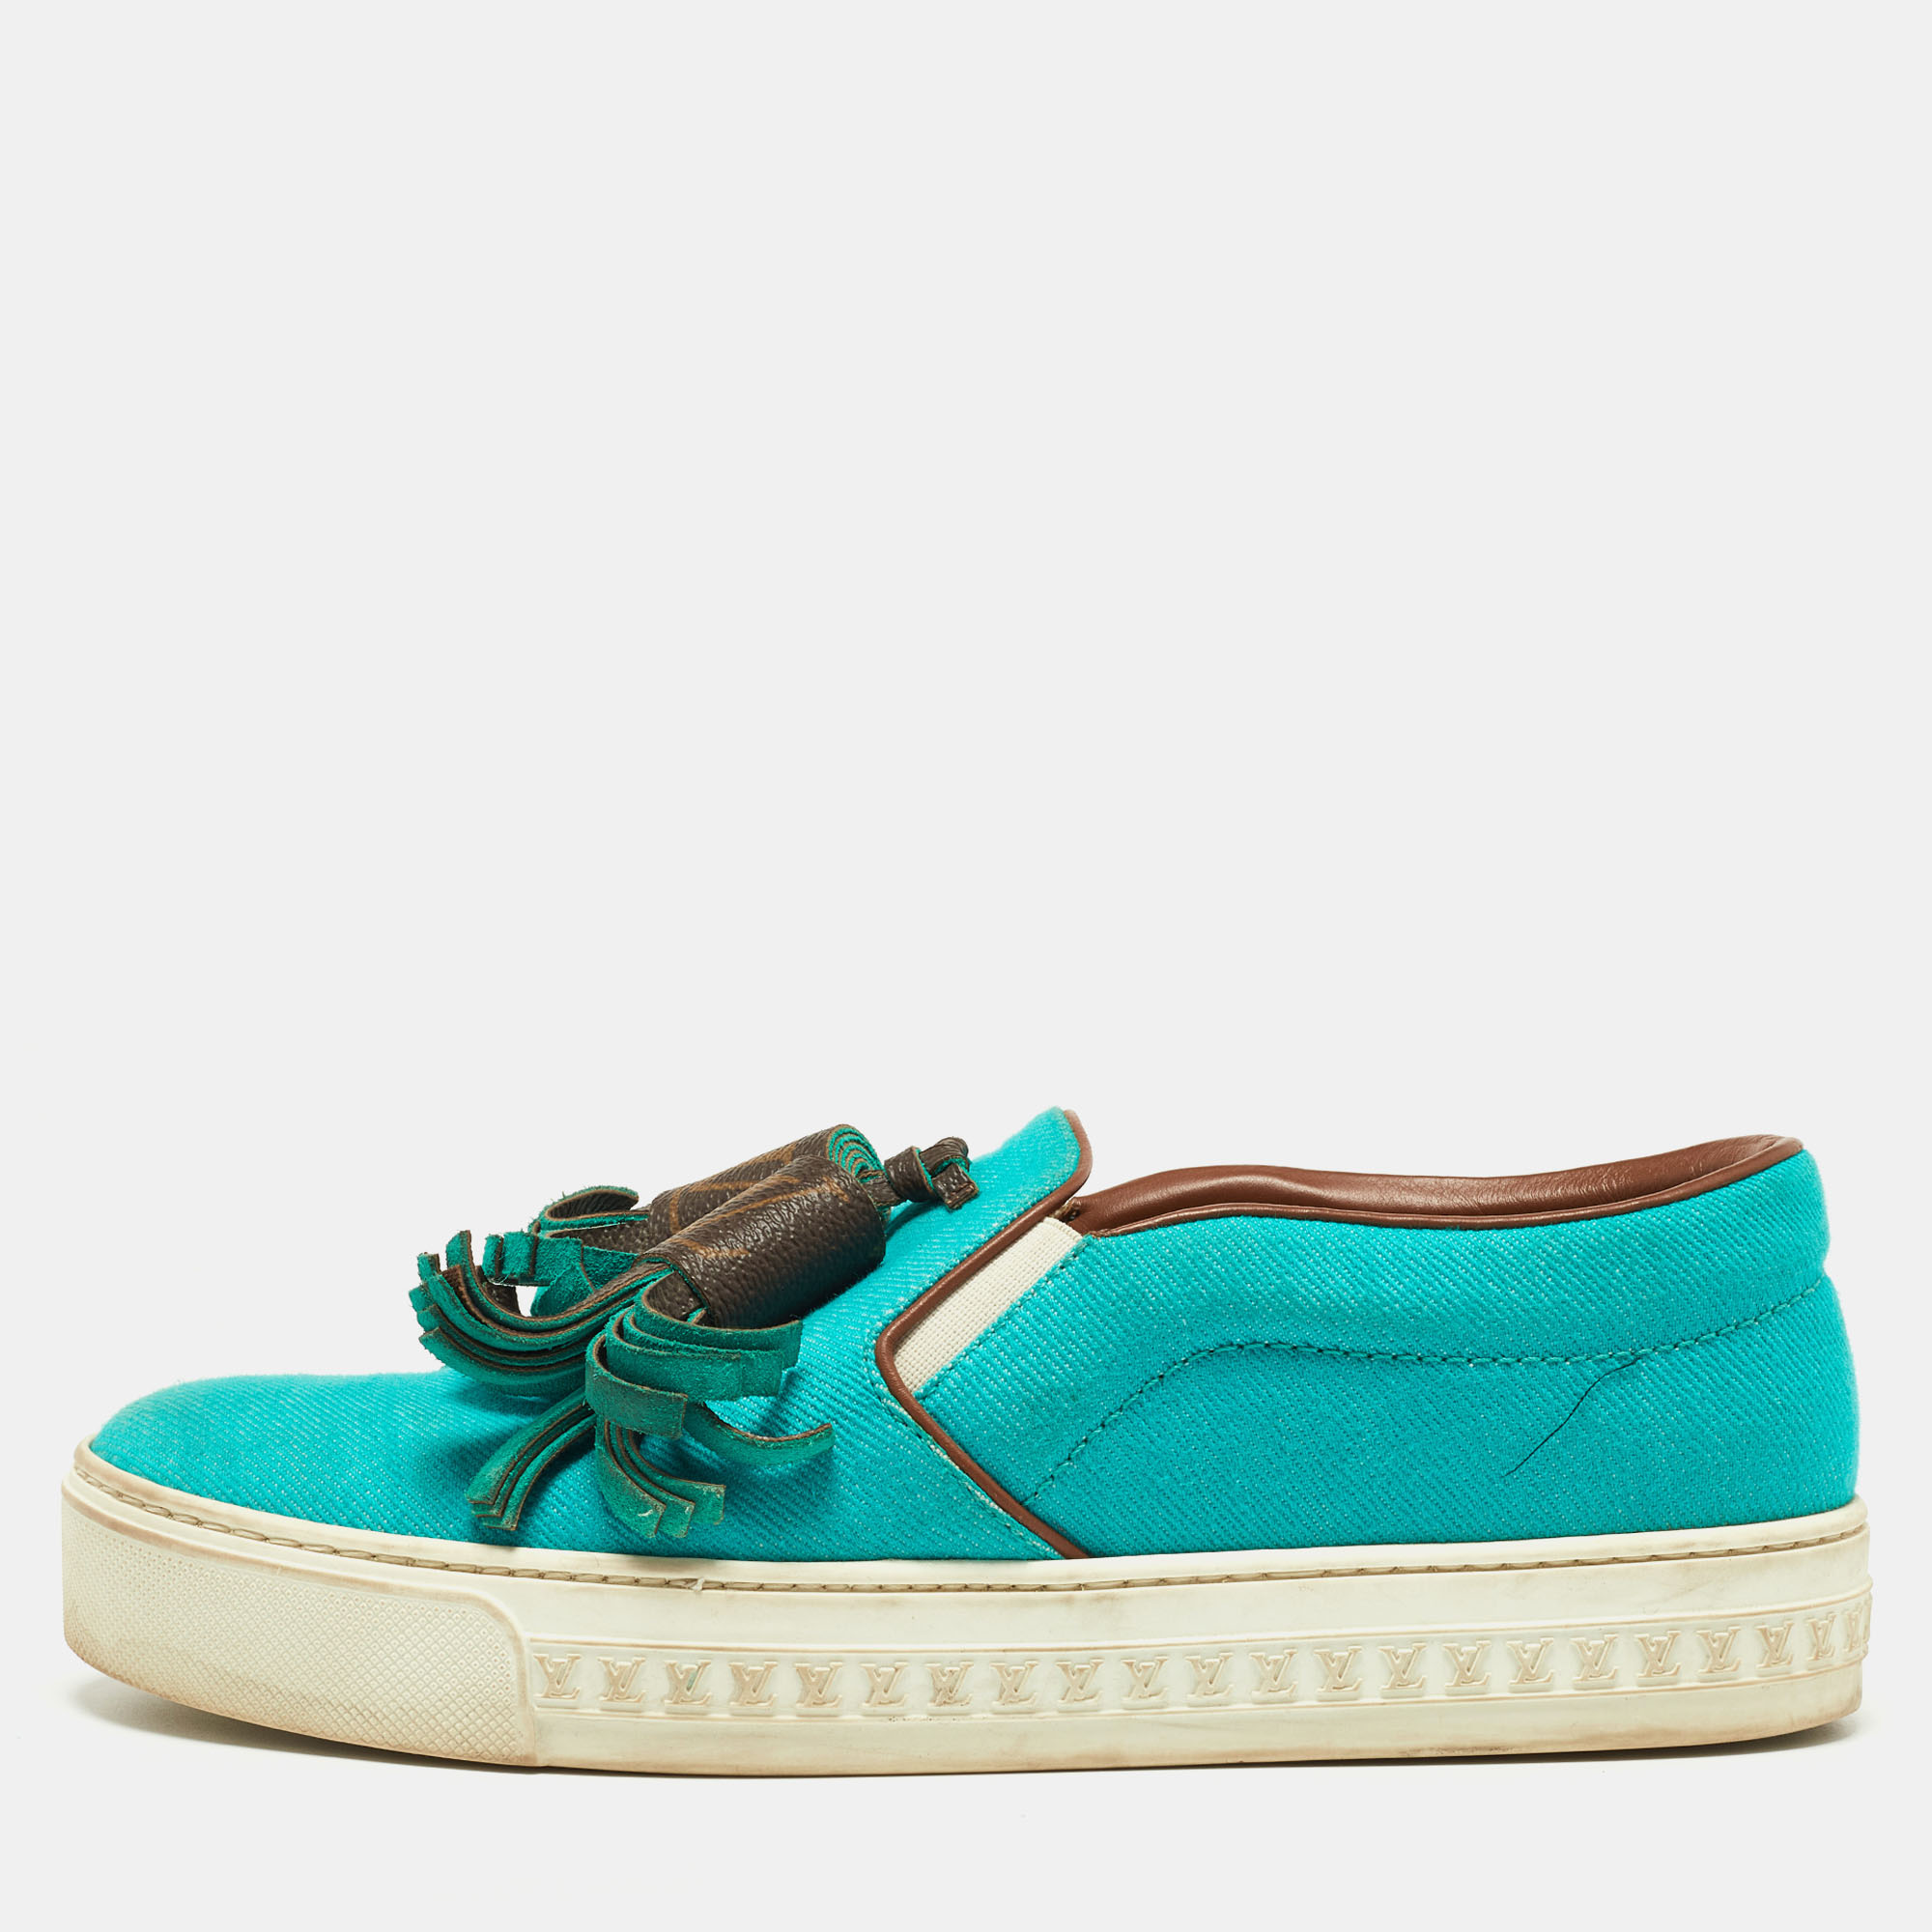 Louis Vuitton Turquoise Twill Fabric And Monogram Canvas Destination Slip On Sneakers Size 37